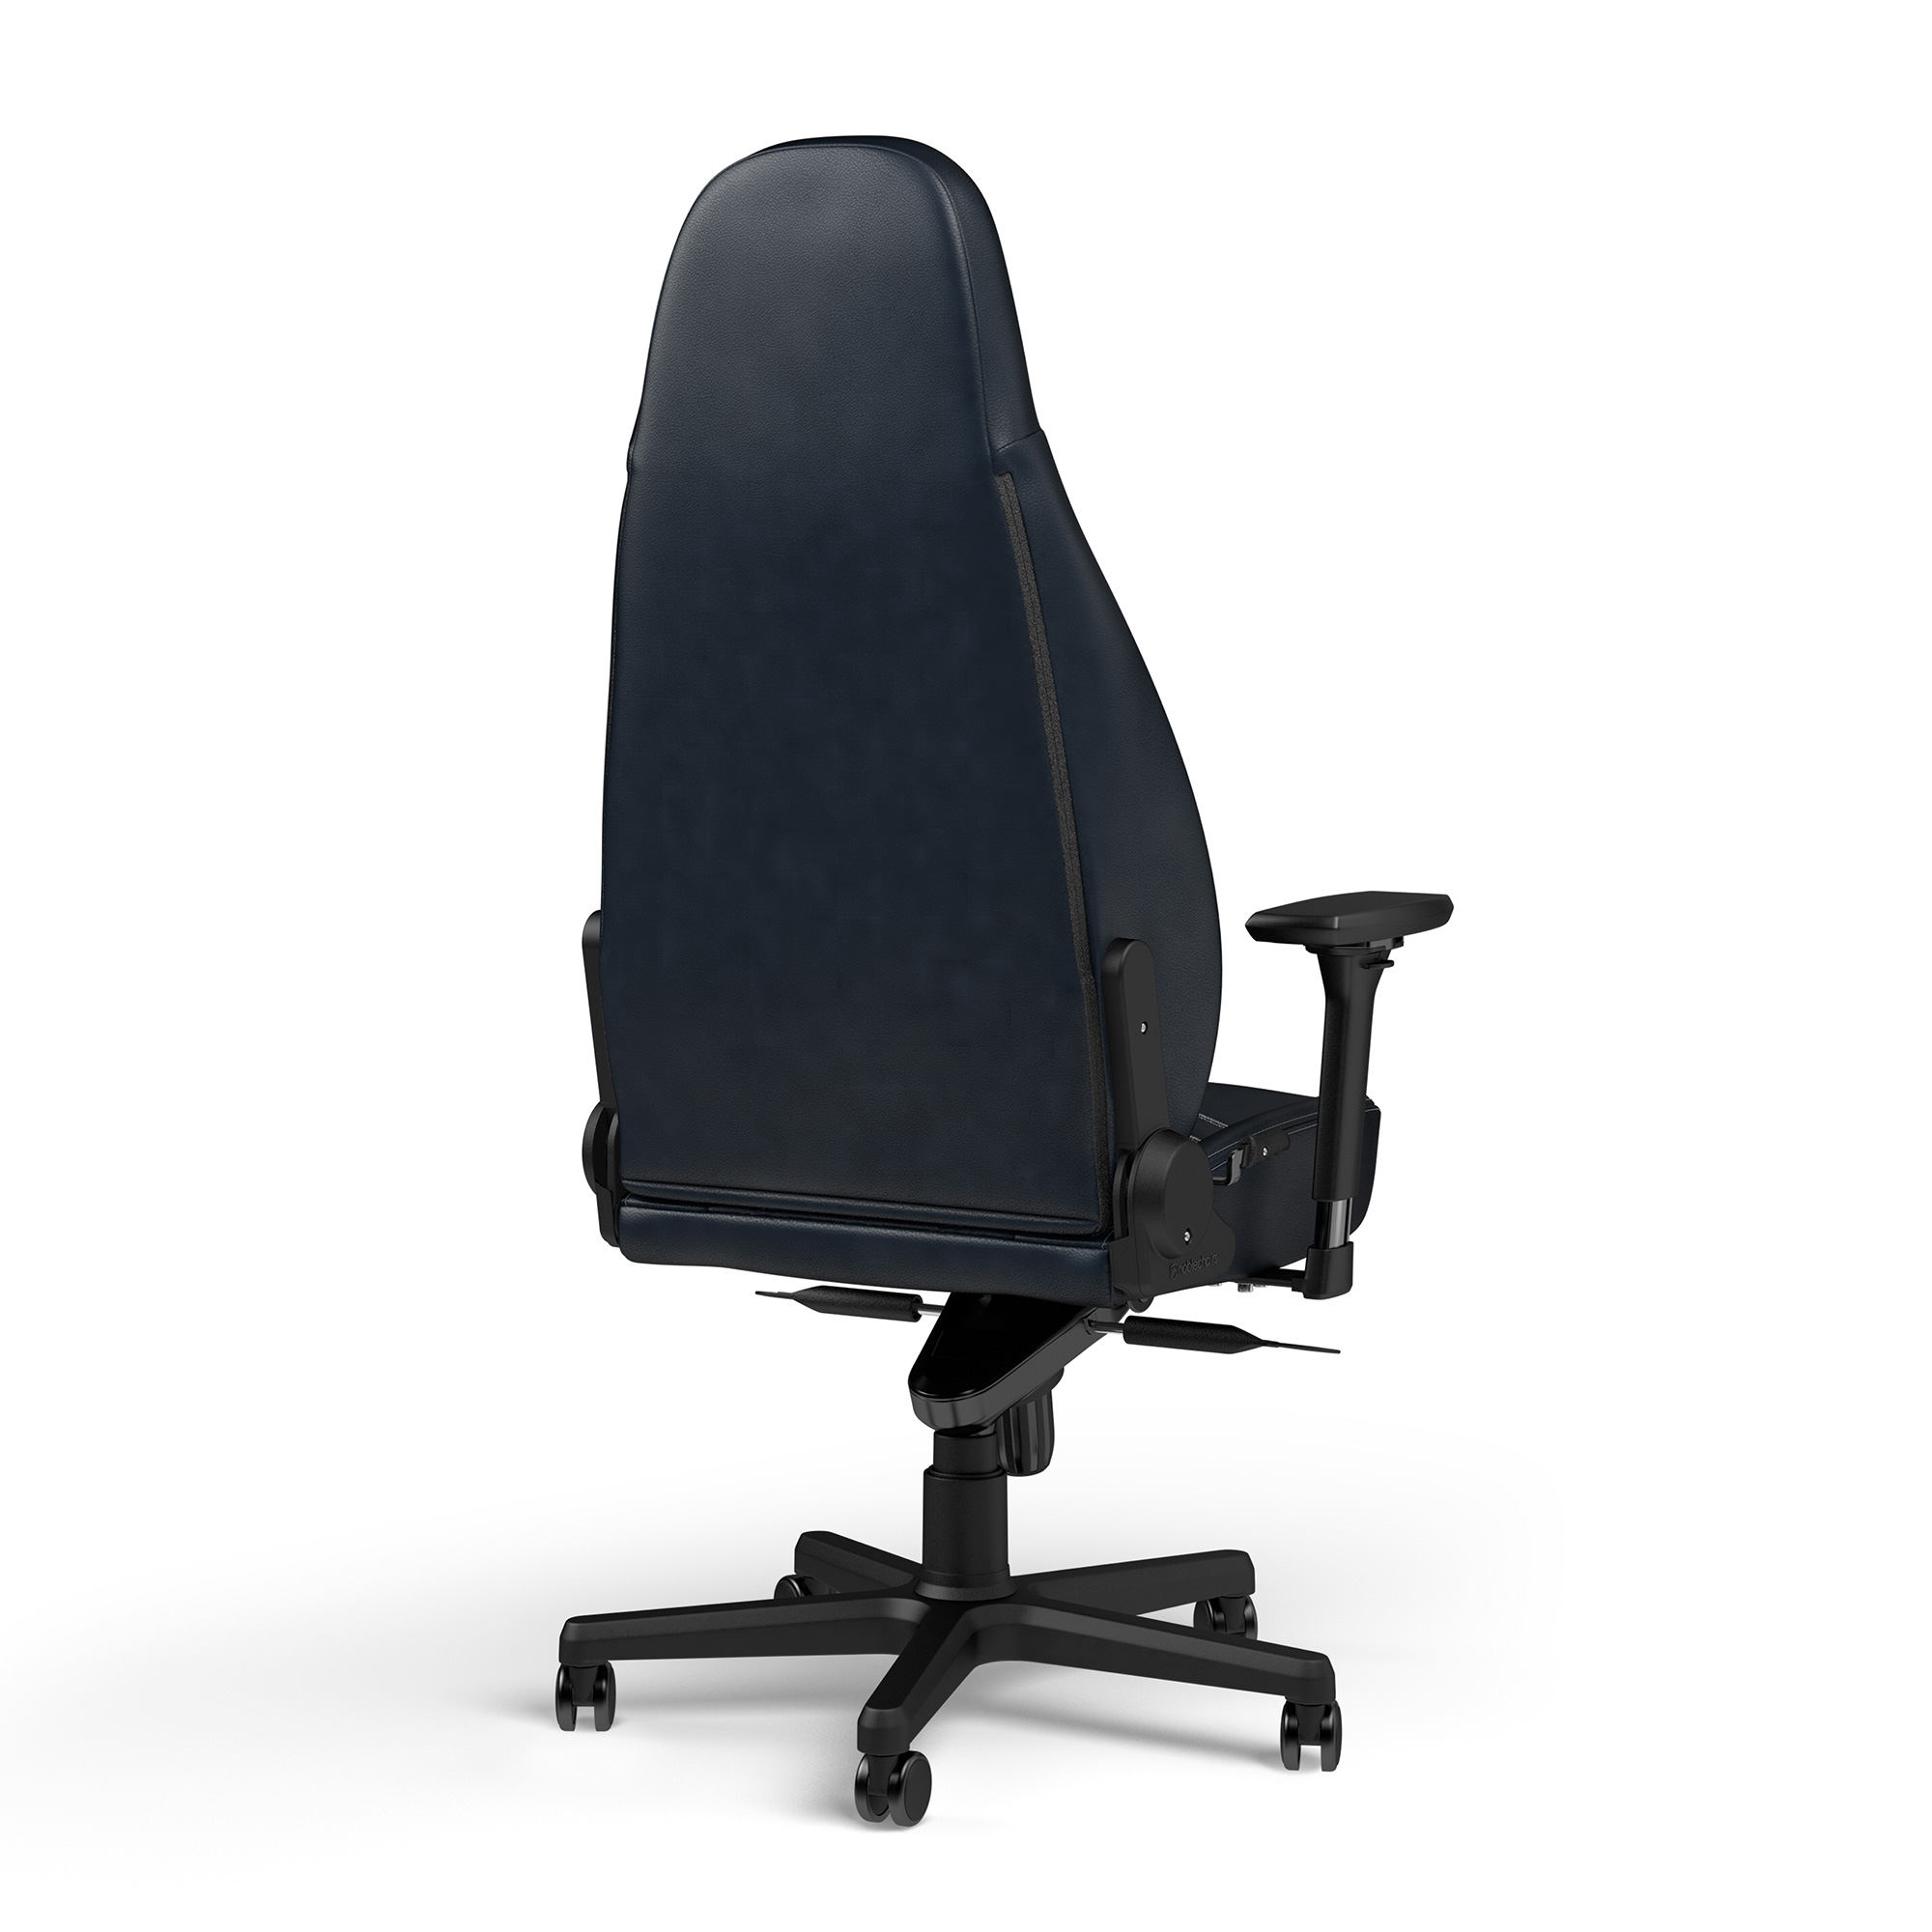 noblechairs - noblechairs ICON Top Grain Leather Gaming Chair - Midnight Blue/Graphite